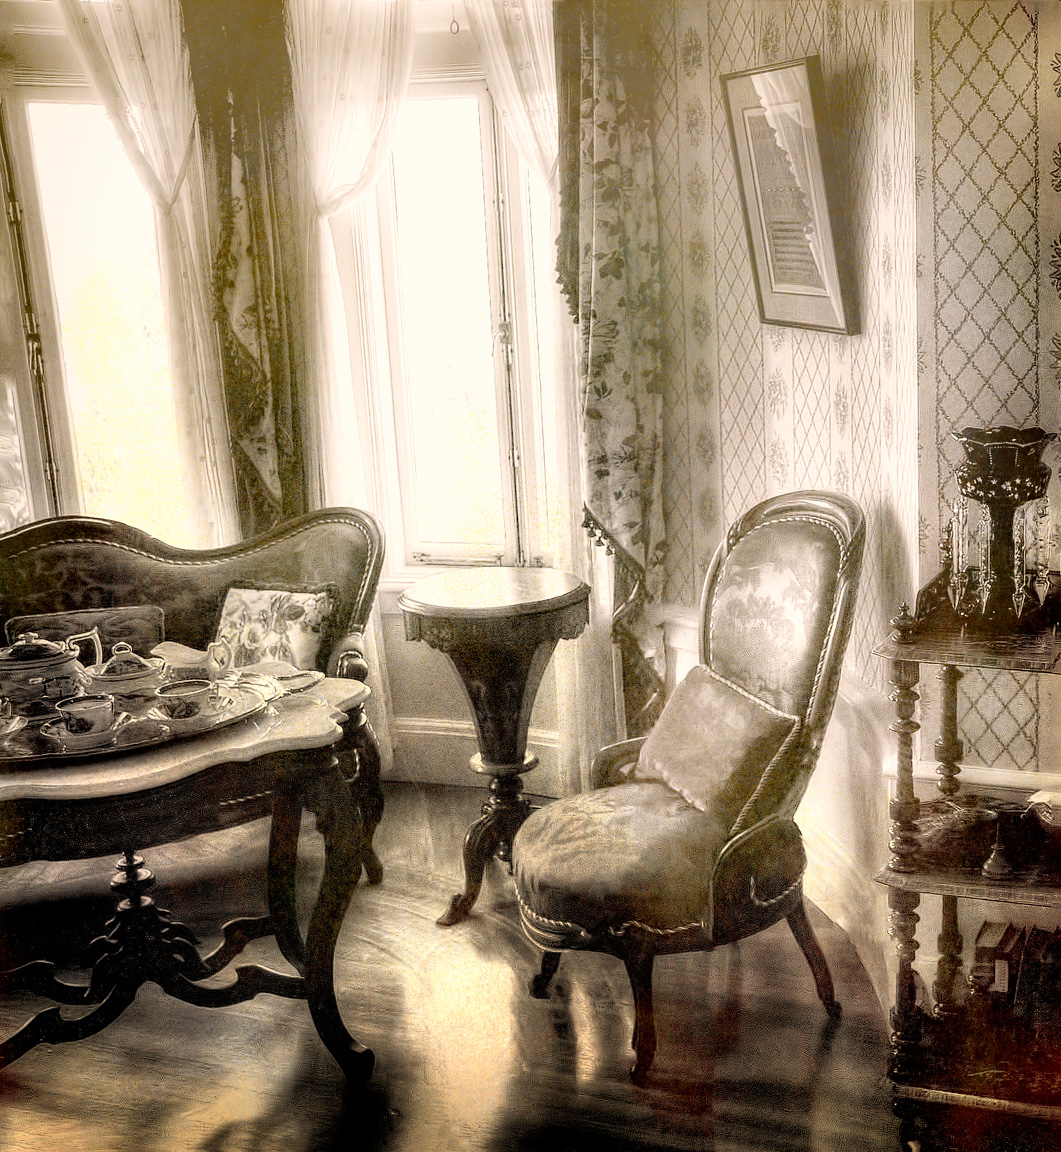 this is an old fashioned room with fancy furnishings